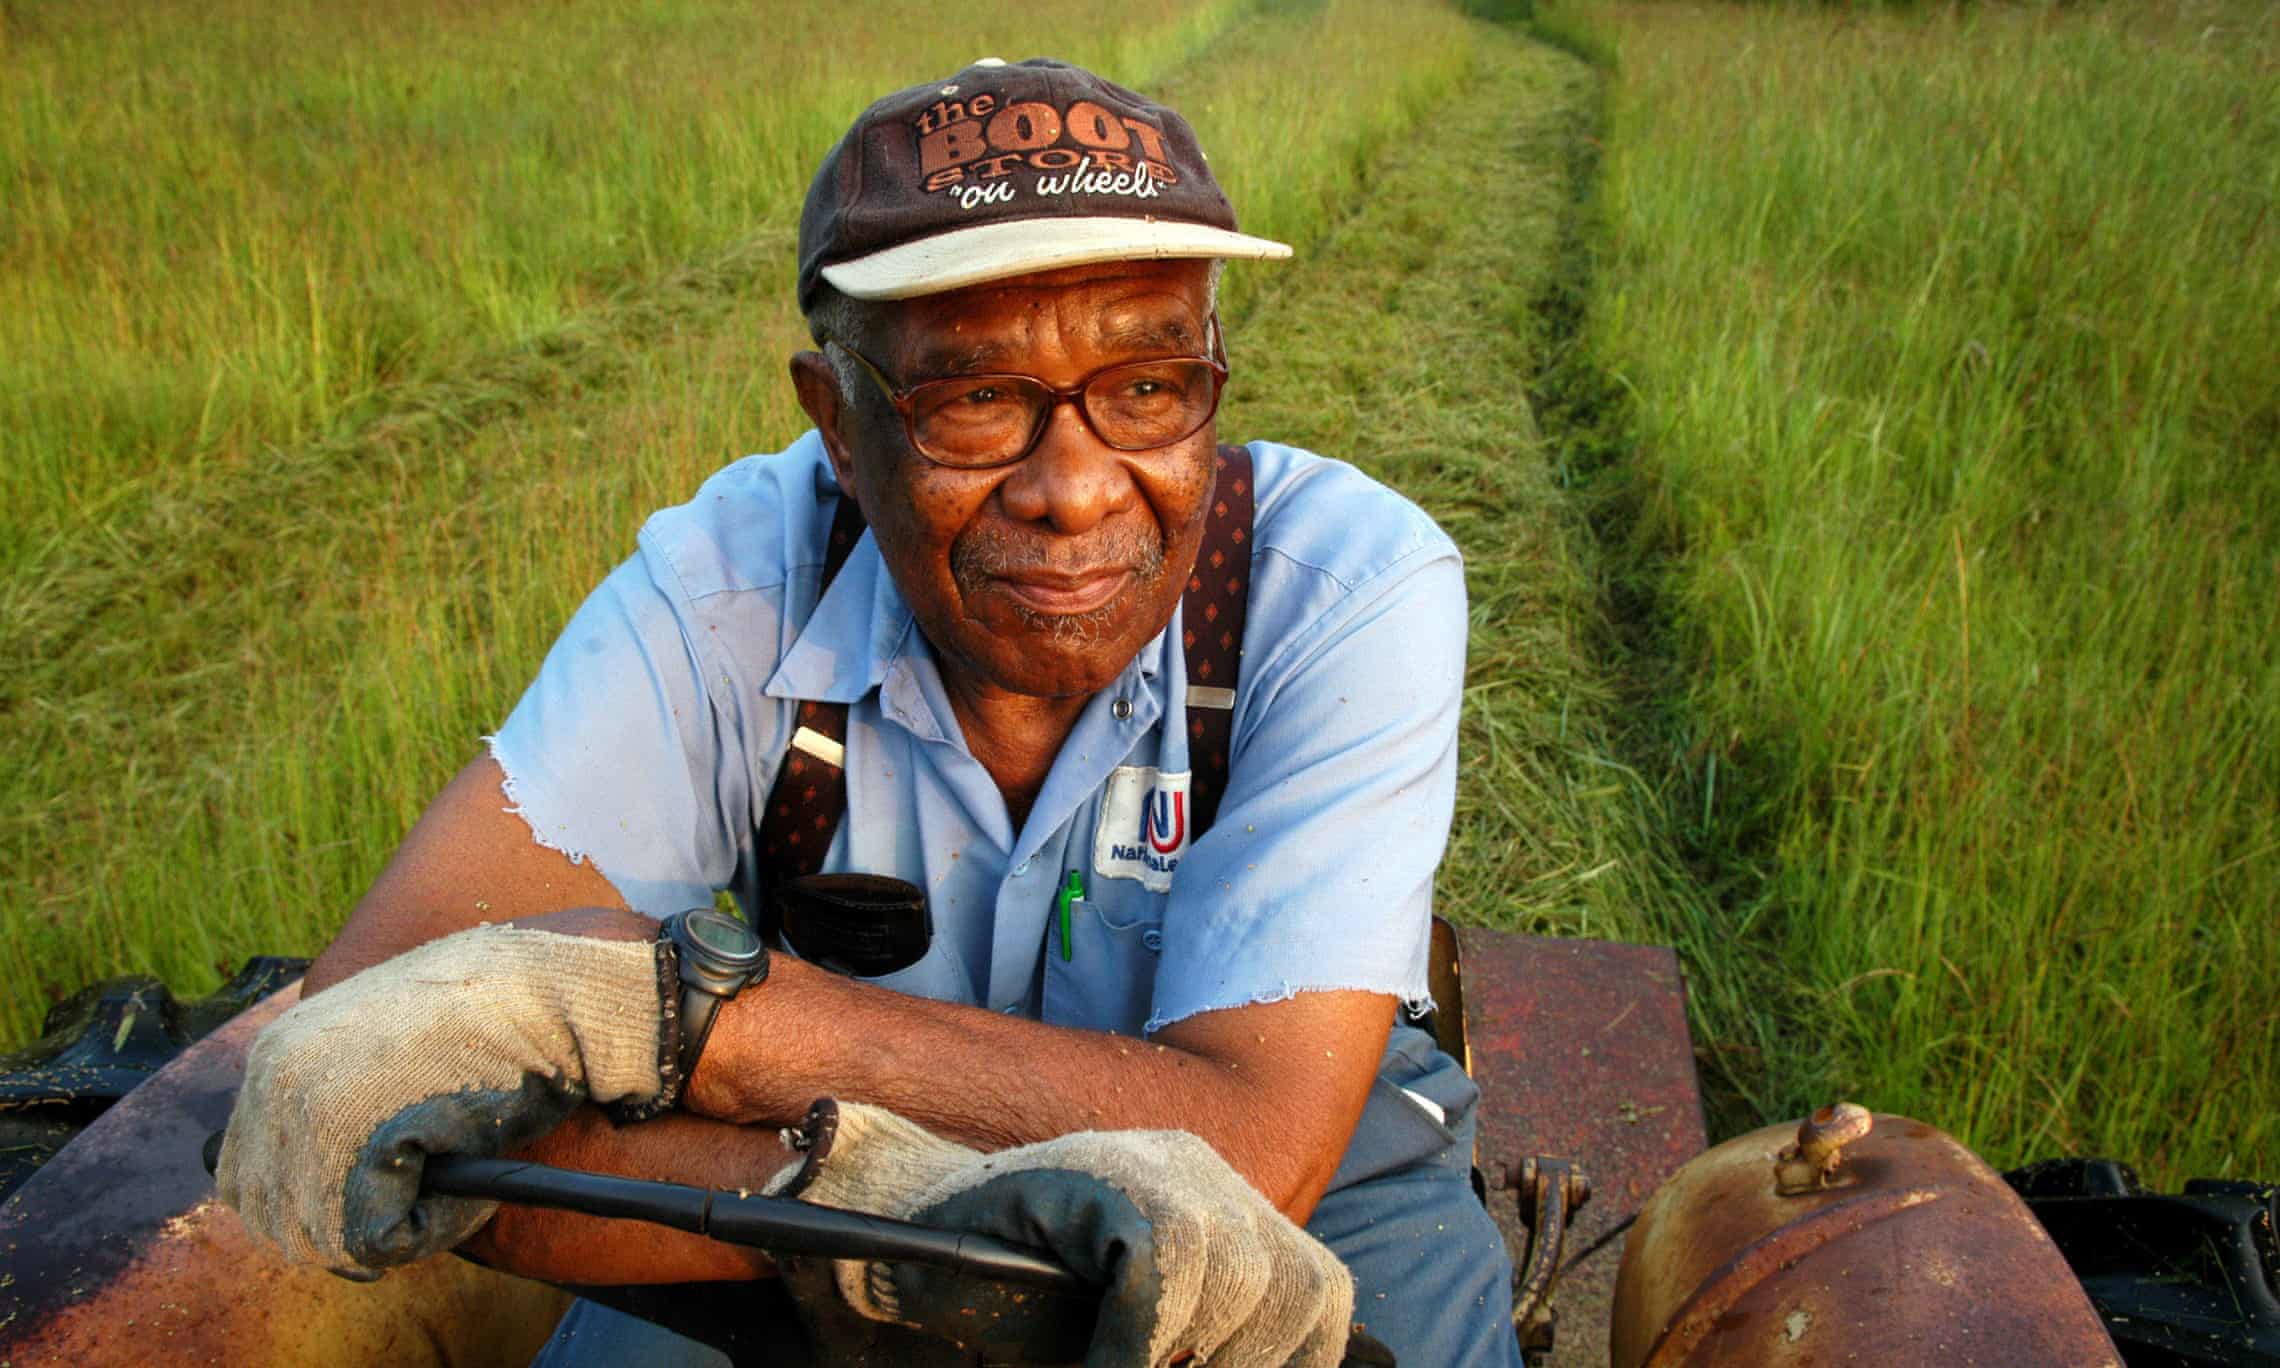 Black farmers get funds